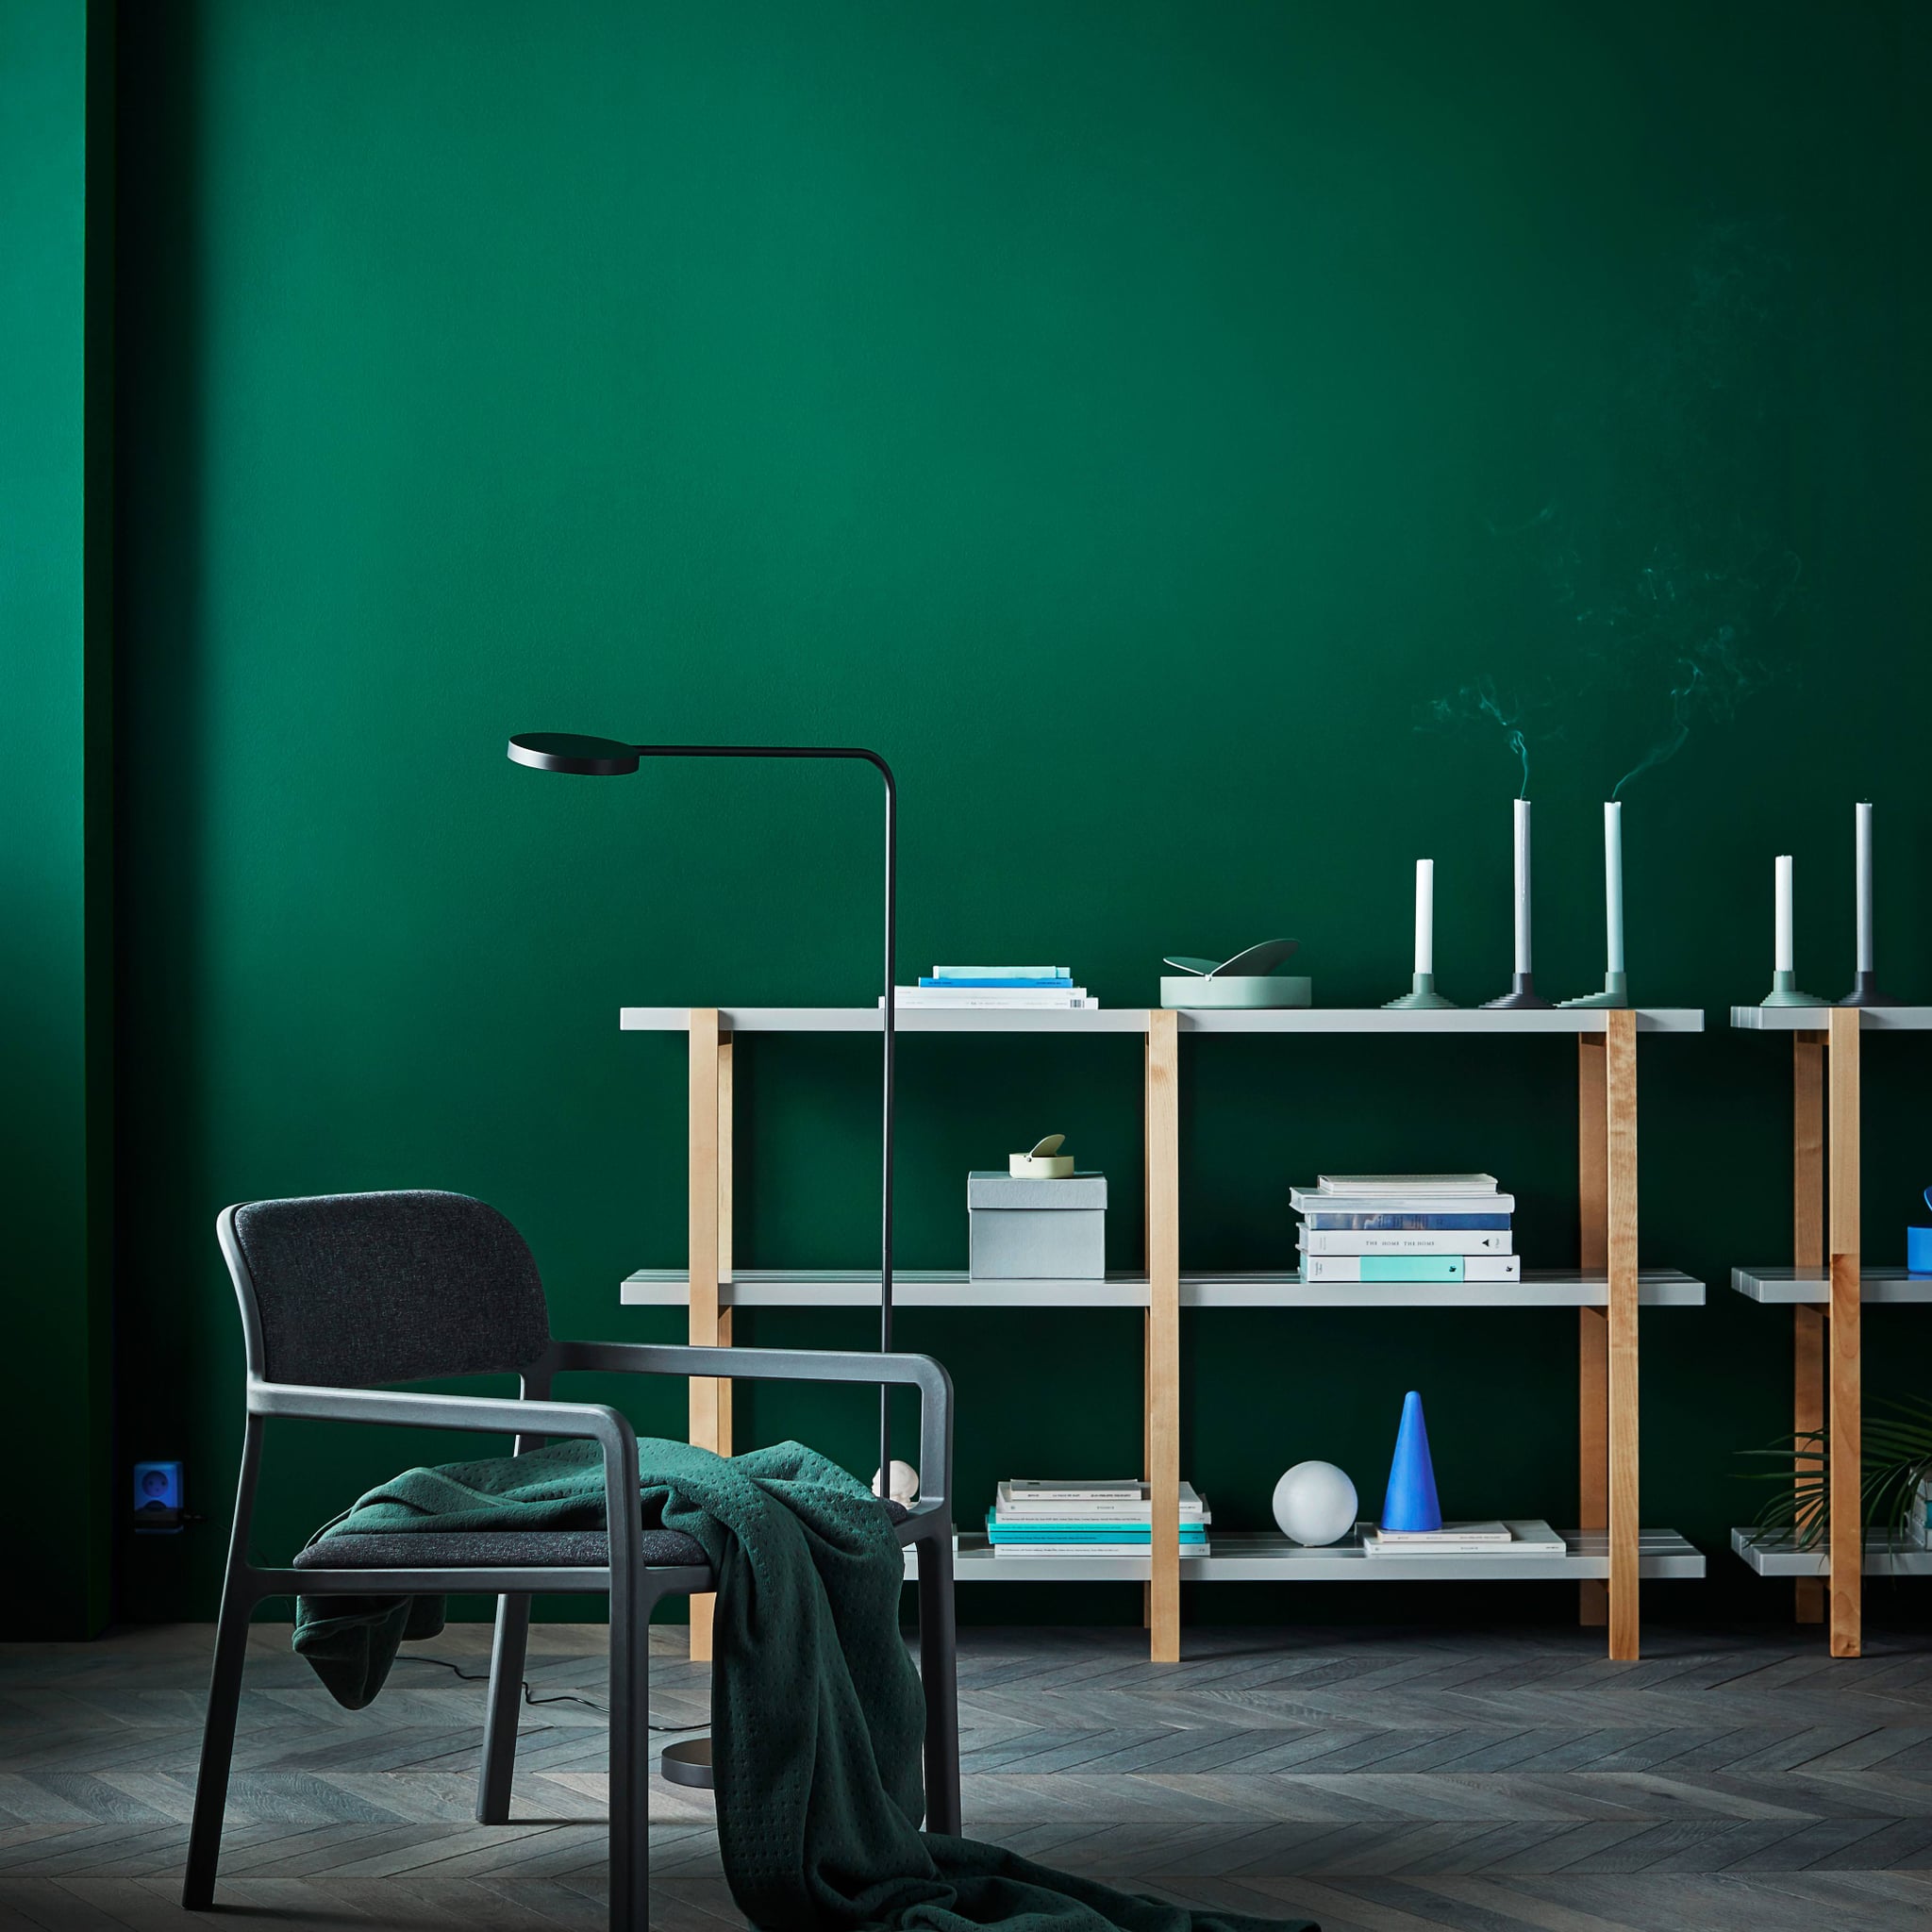 Ikea’s Ypperlig collection